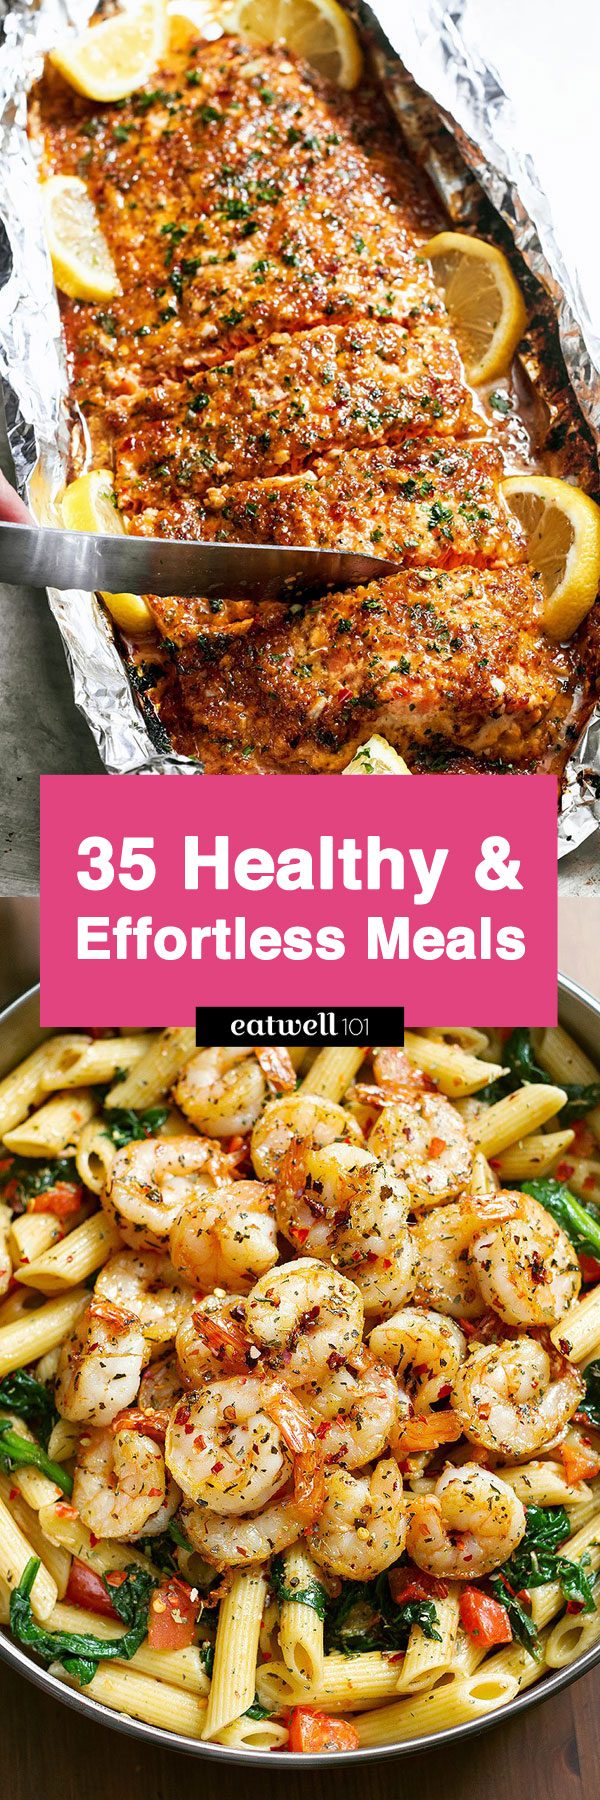 Easy Healthy Dinner Ideas 49 Low Effort And Healthy Dinner Recipes Eatwell101